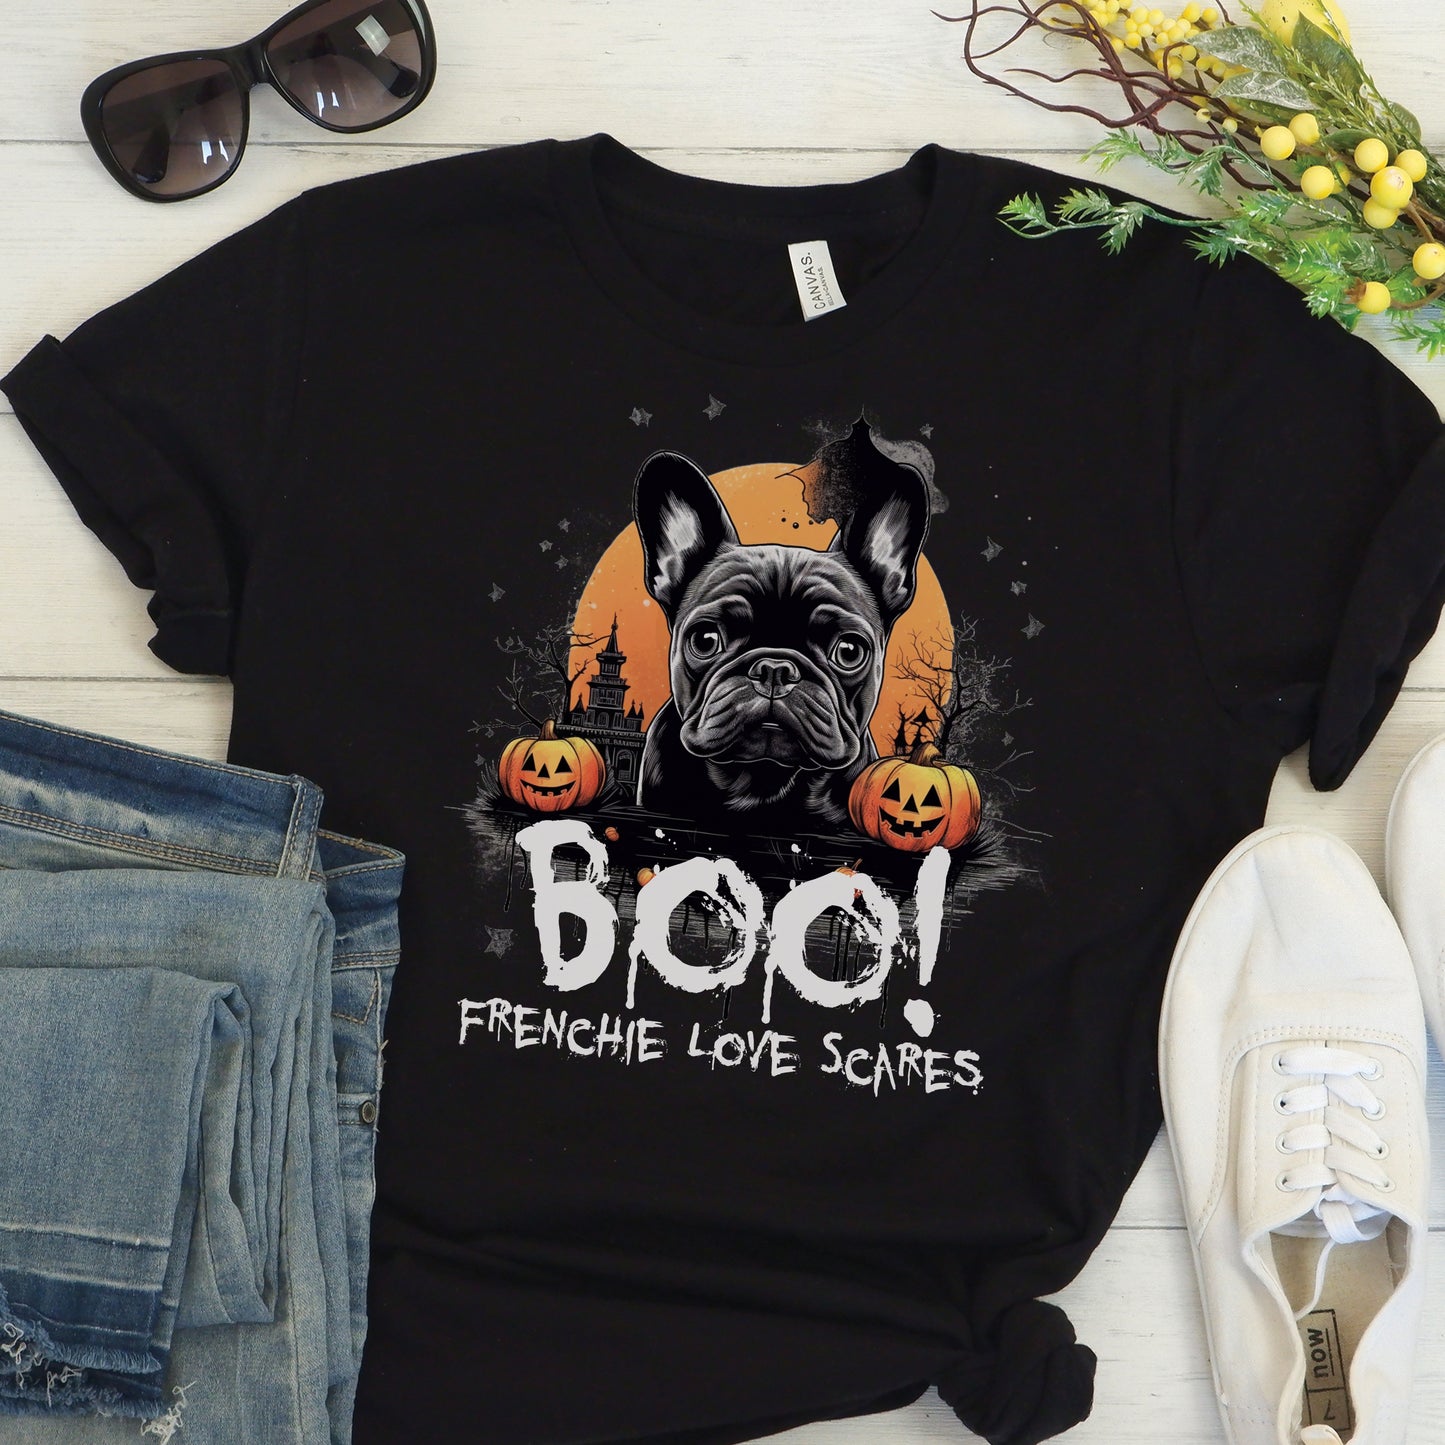 French-Inspired Halloween Tees - Unisex T-Shirt